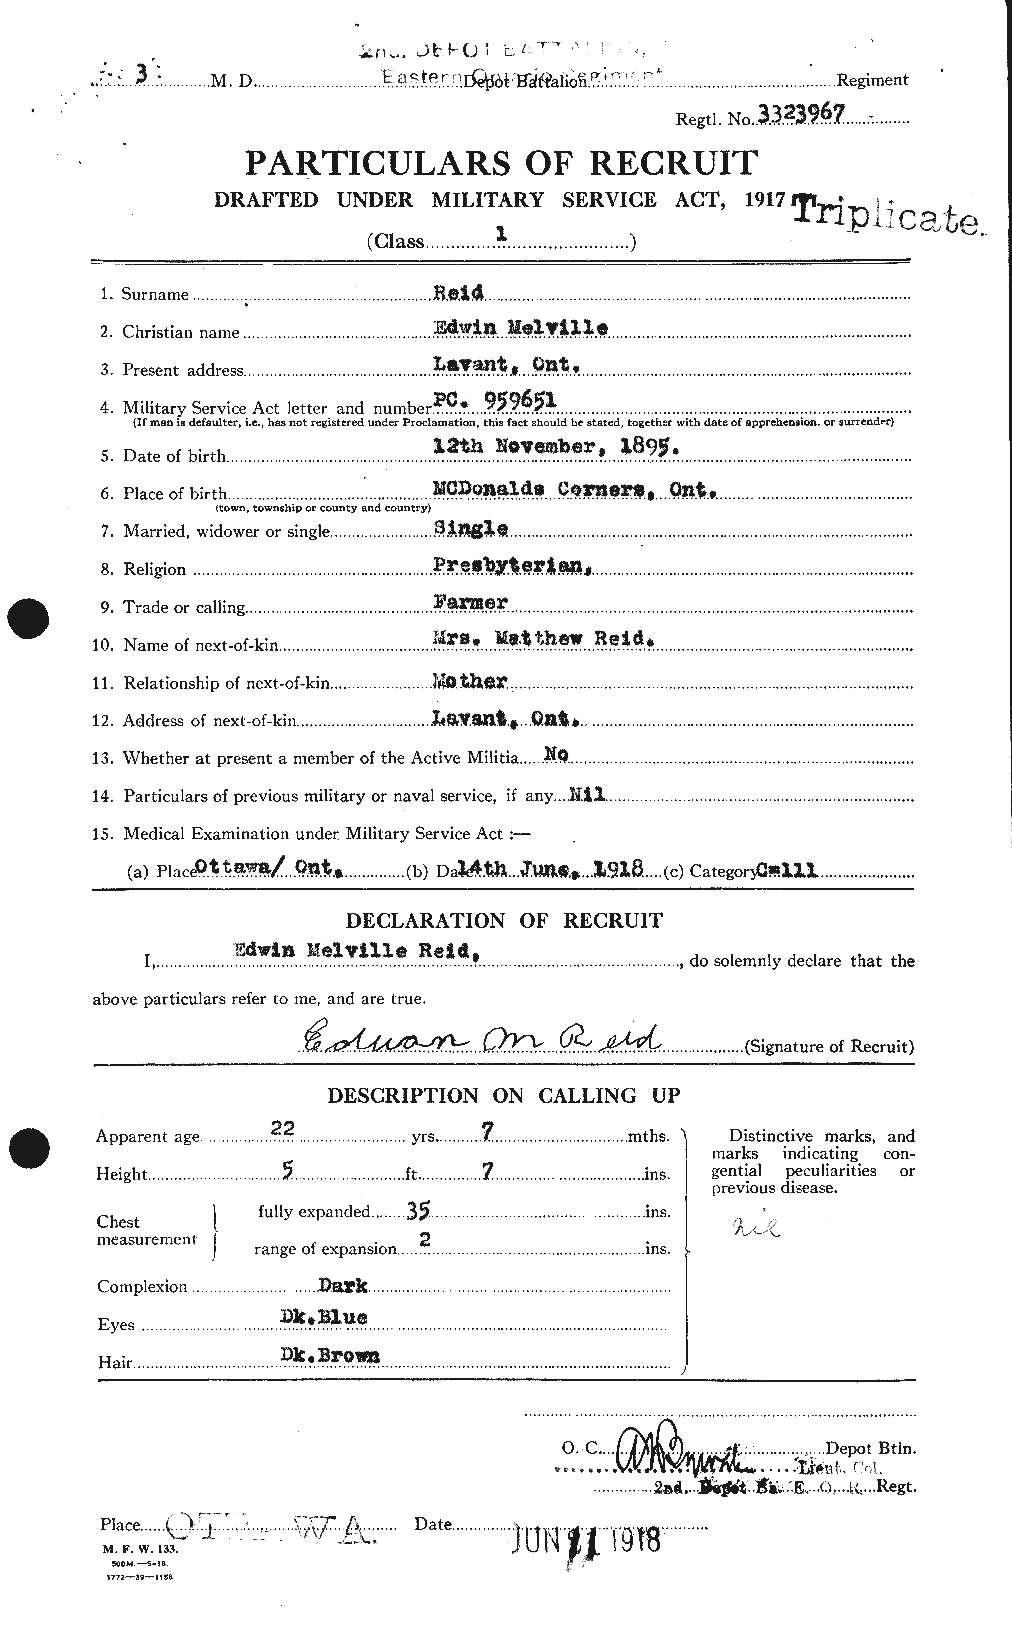 Personnel Records of the First World War - CEF 597996a